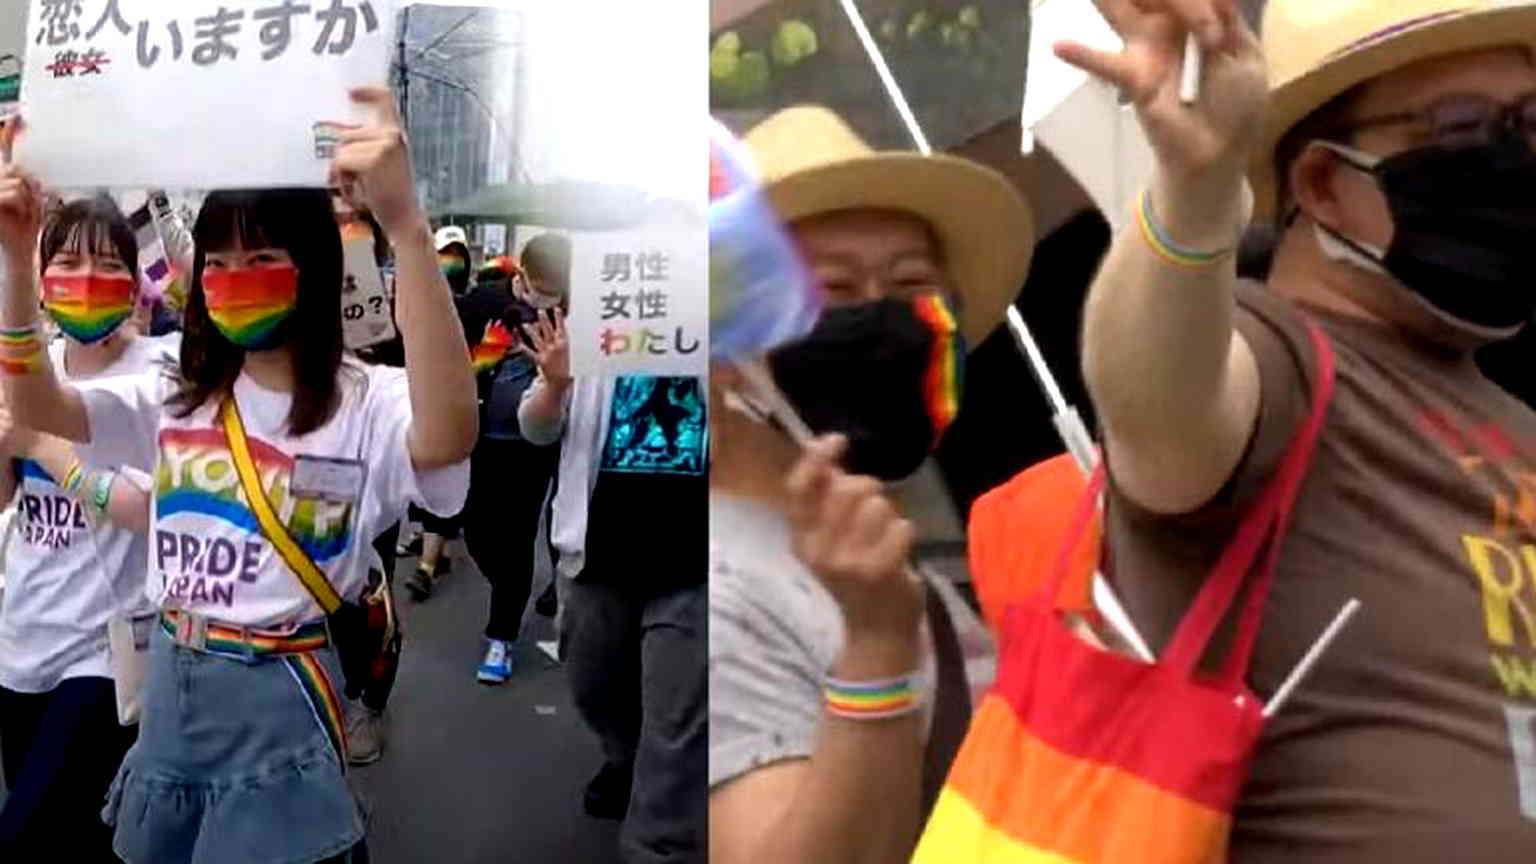 Ban on same-sex marriage is unconstitutional, Japan court rules